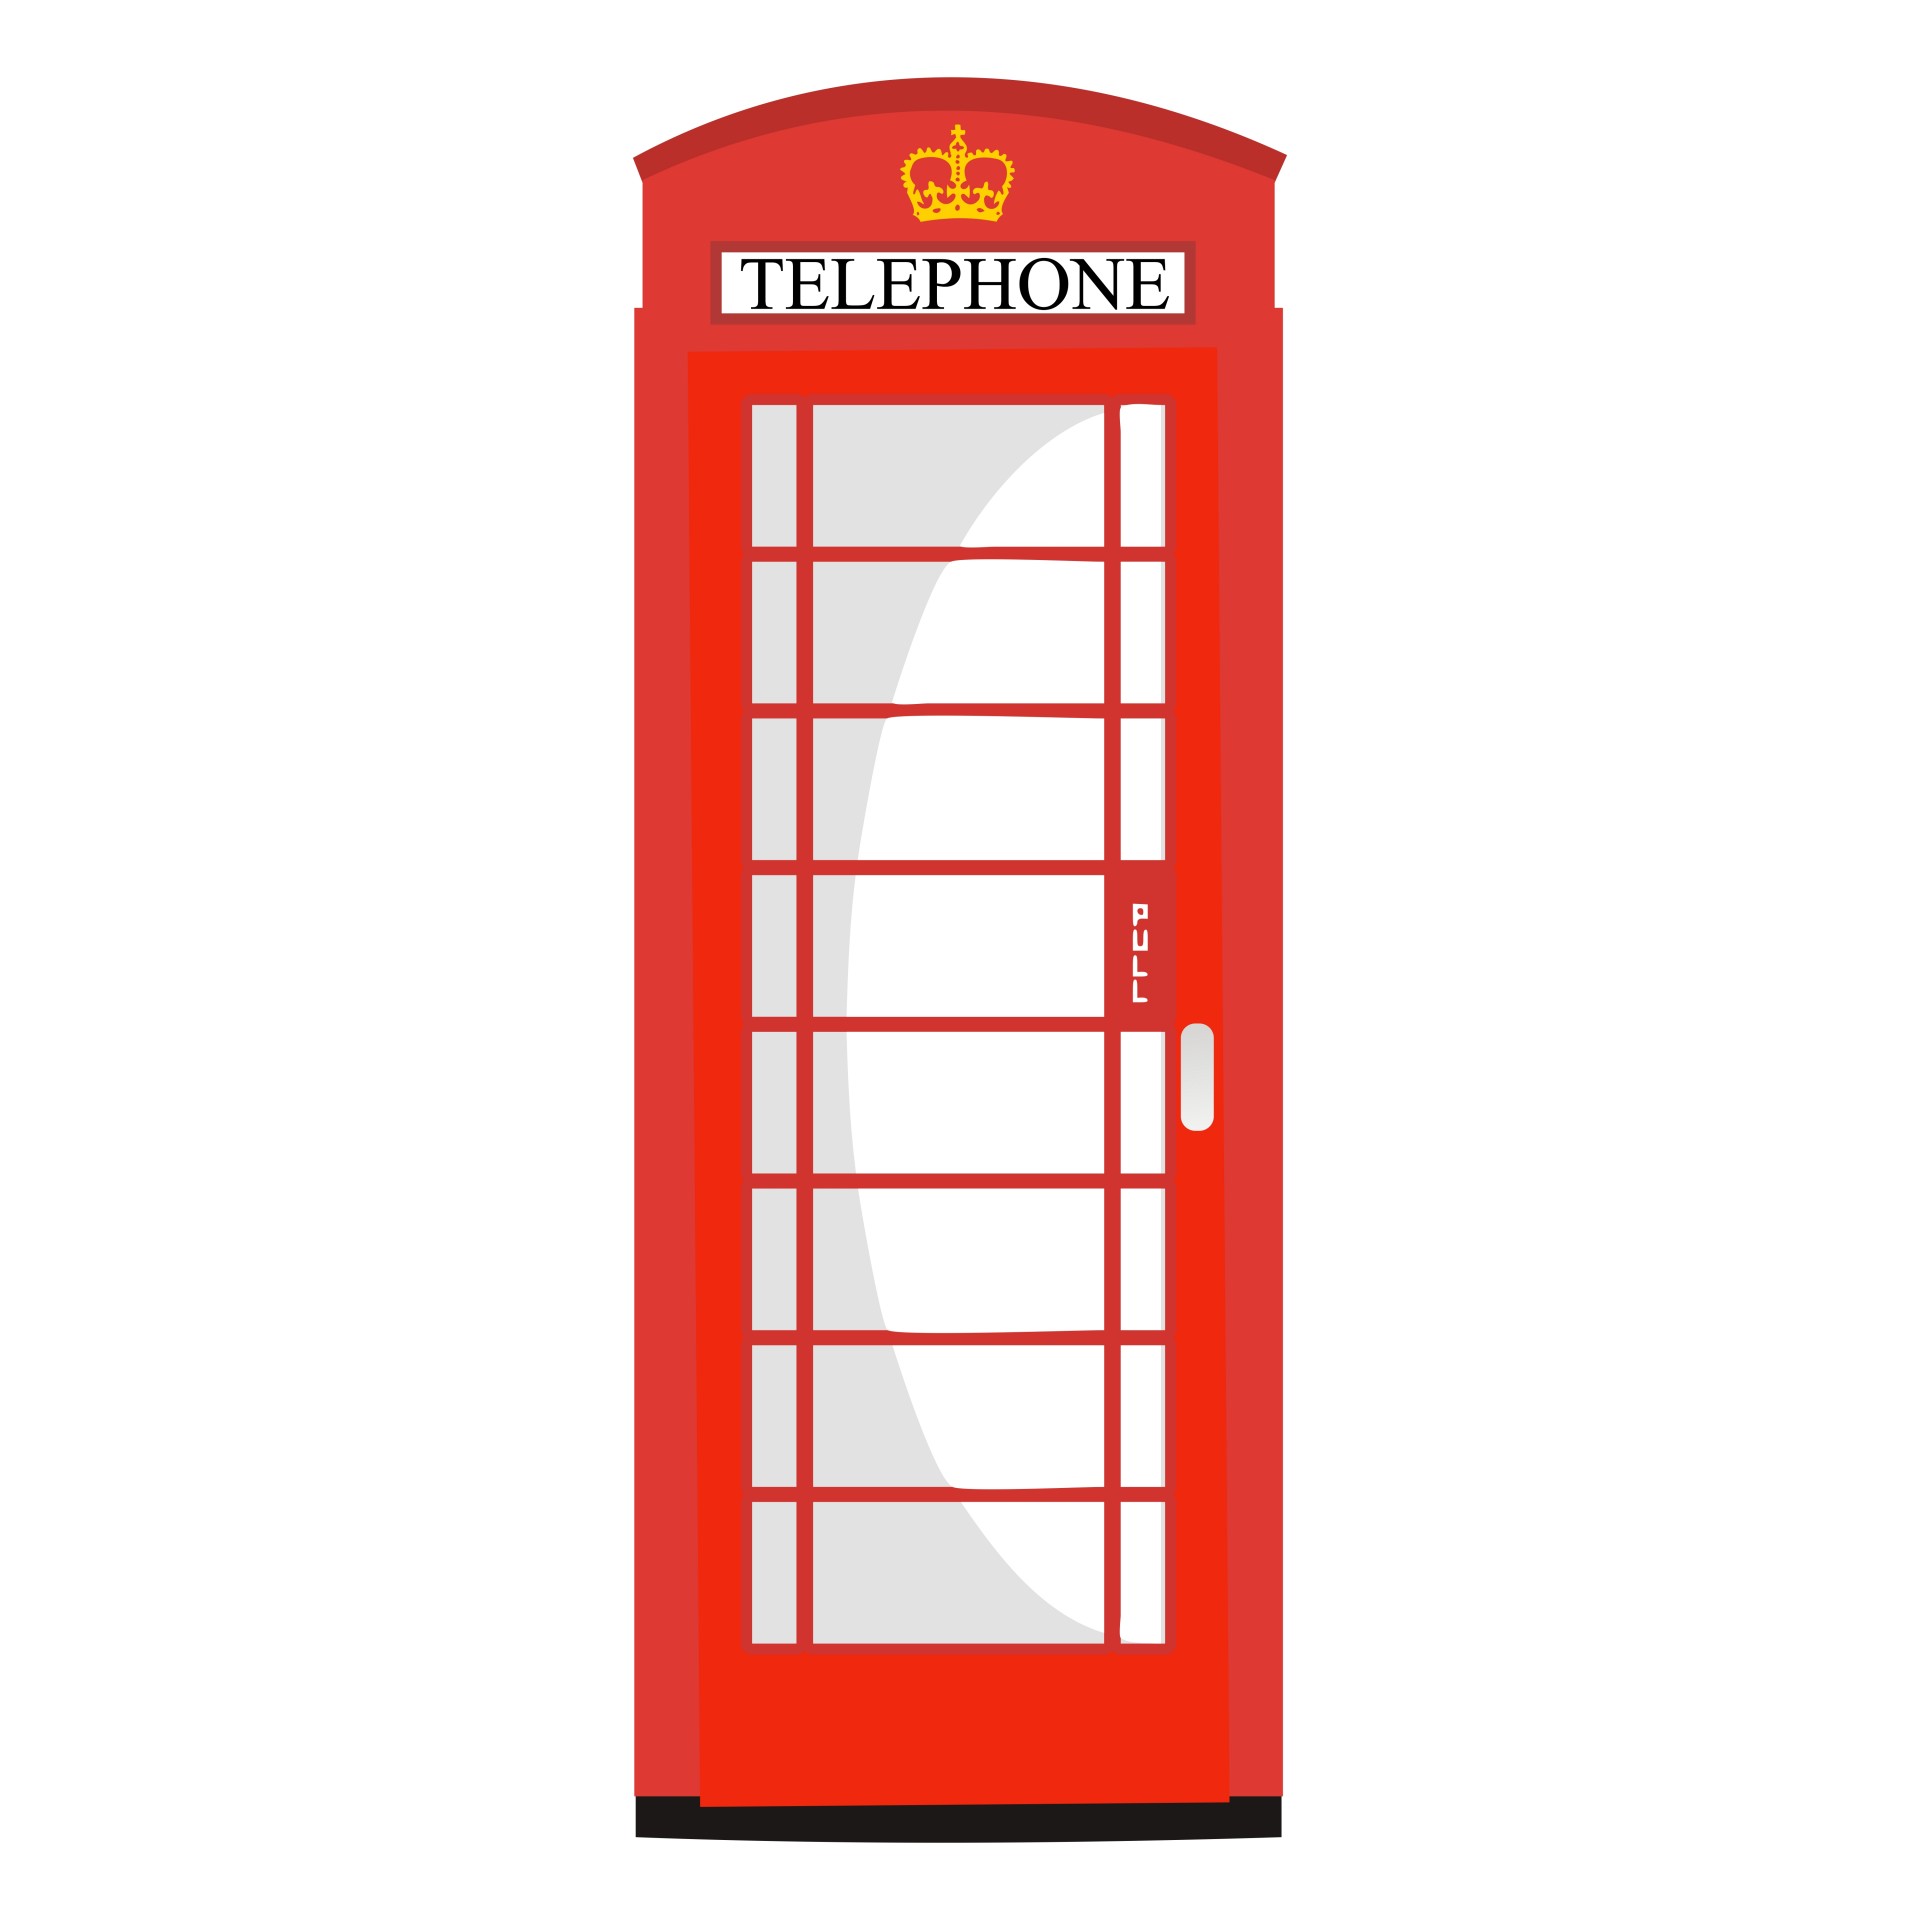 phone booth clipart - photo #48